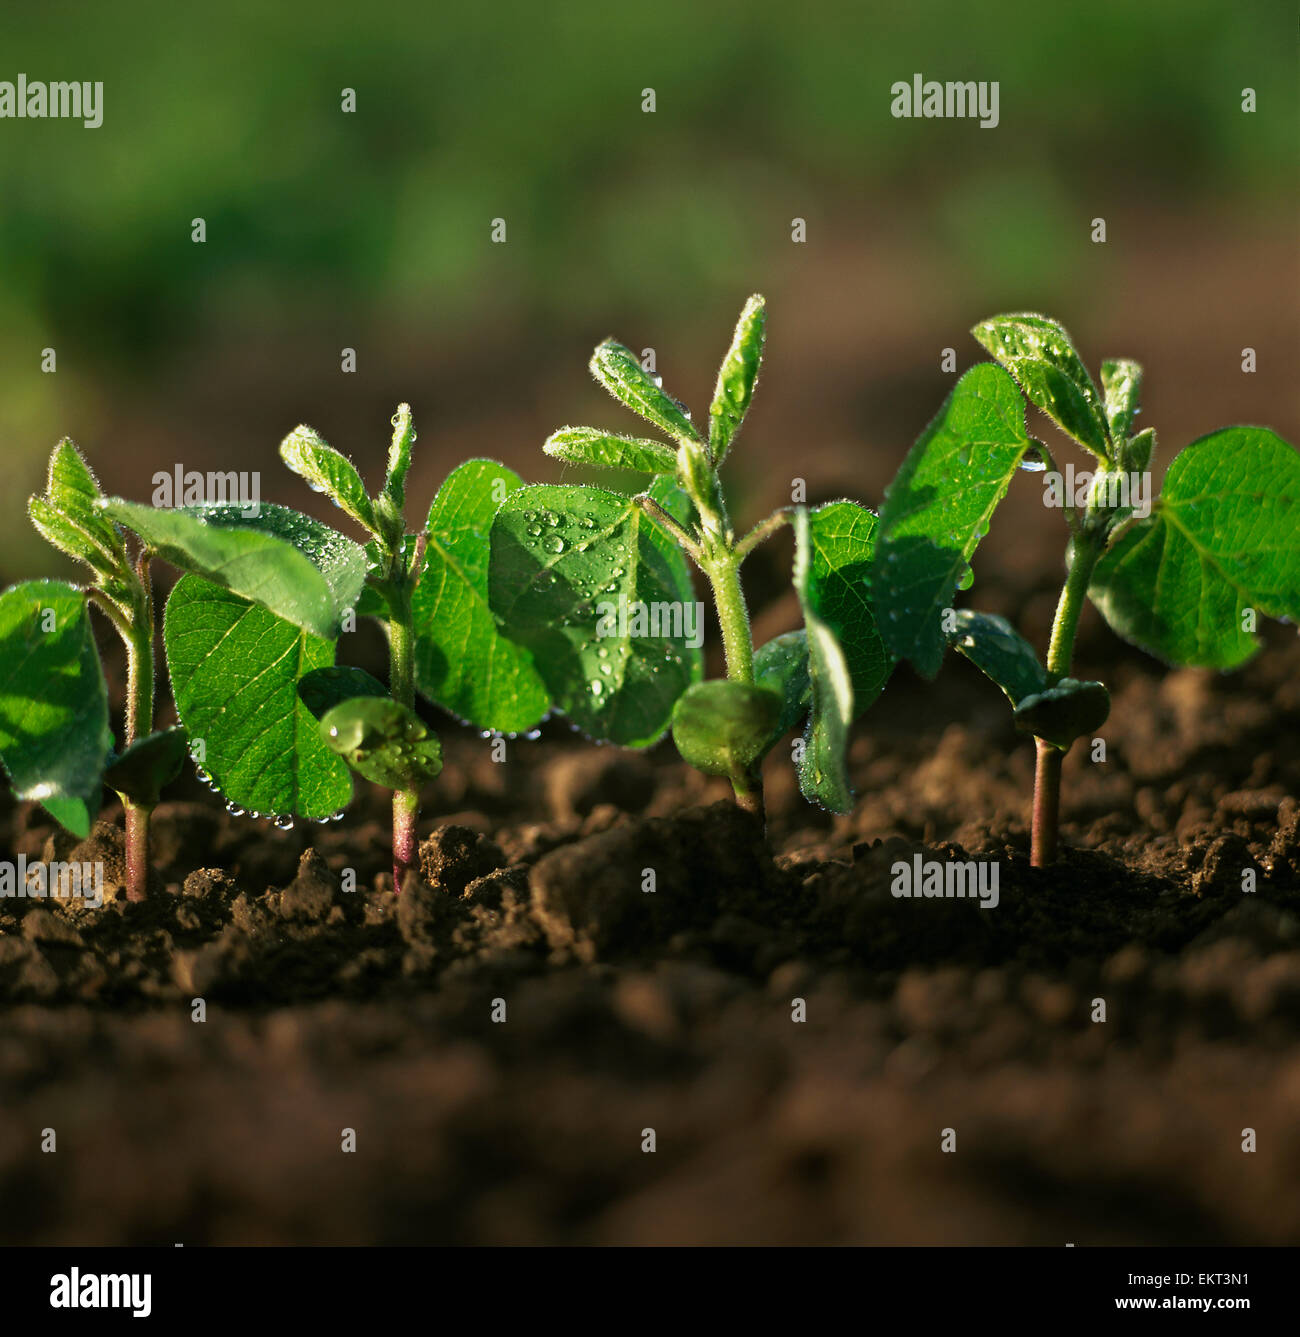 Agriculture - Soybean seedlings lit by early morning light / Ontario, Canada. Stock Photo